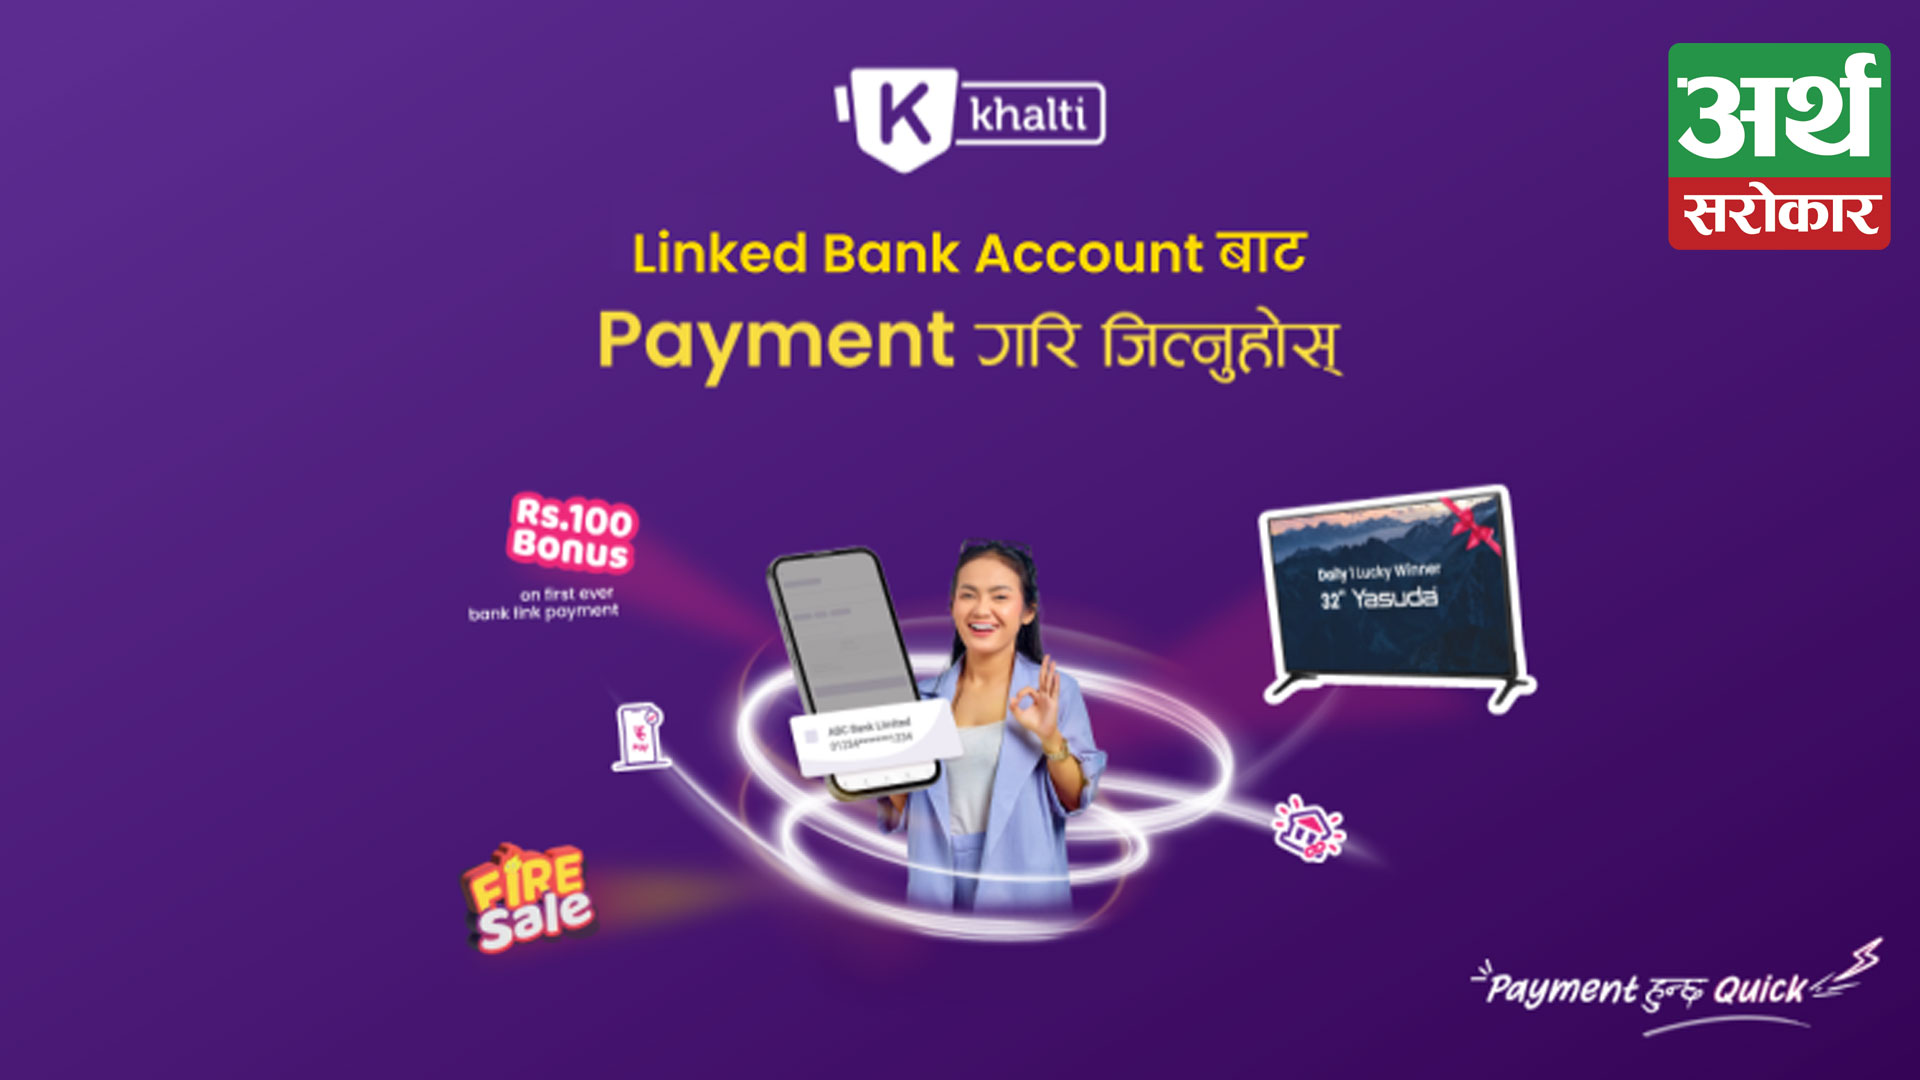 Win 32’’ TV daily for 45 days and get Rs.100 Bonus on Bank Link payment from Khalti